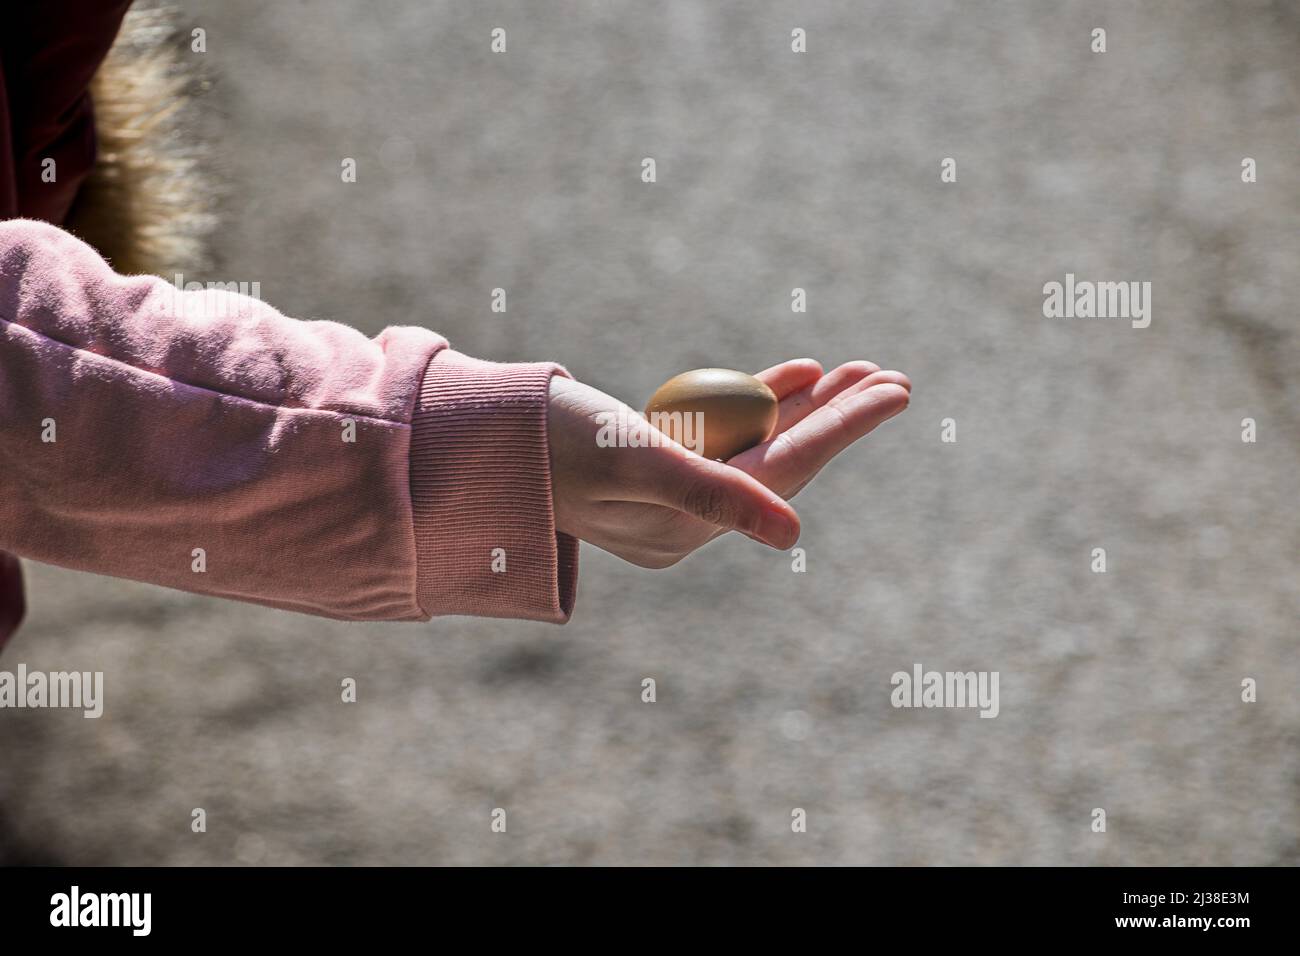 A girl holds out a hand to show a Pheasants egg, Stock Photo